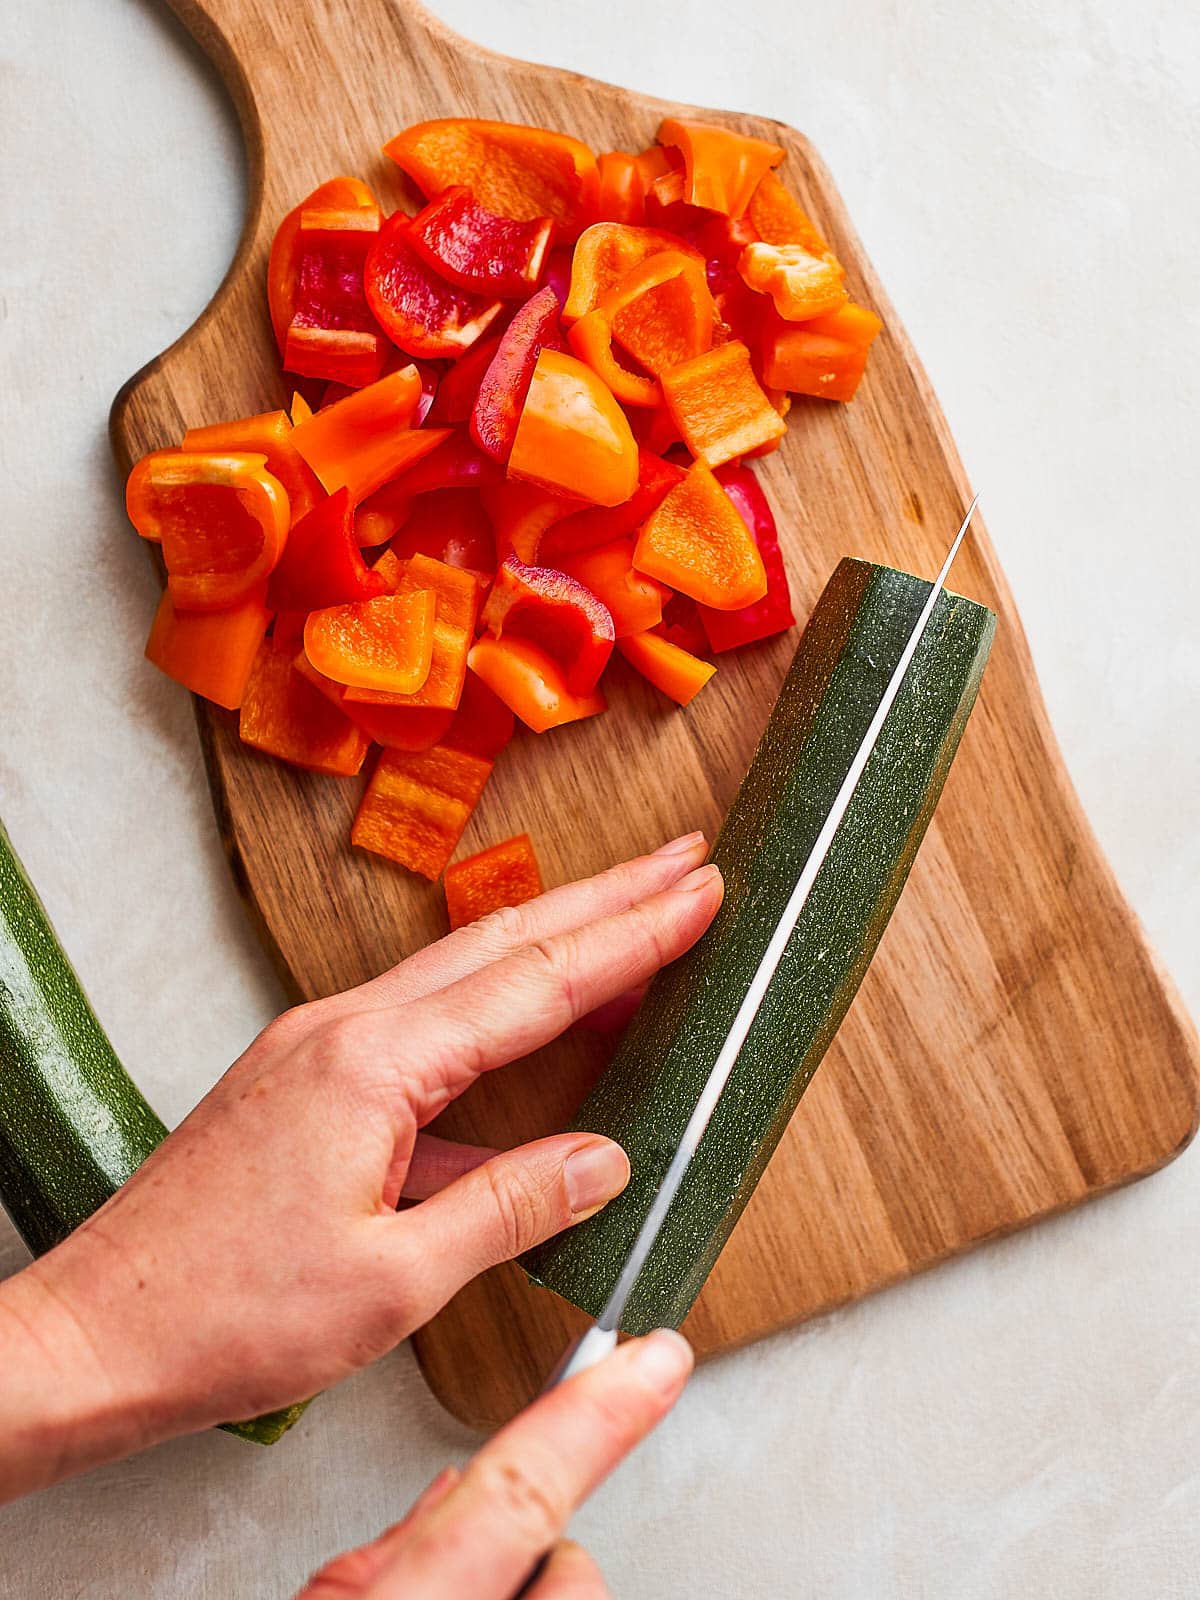 Chop the zucchini in half lengthways, then half again to create quarters